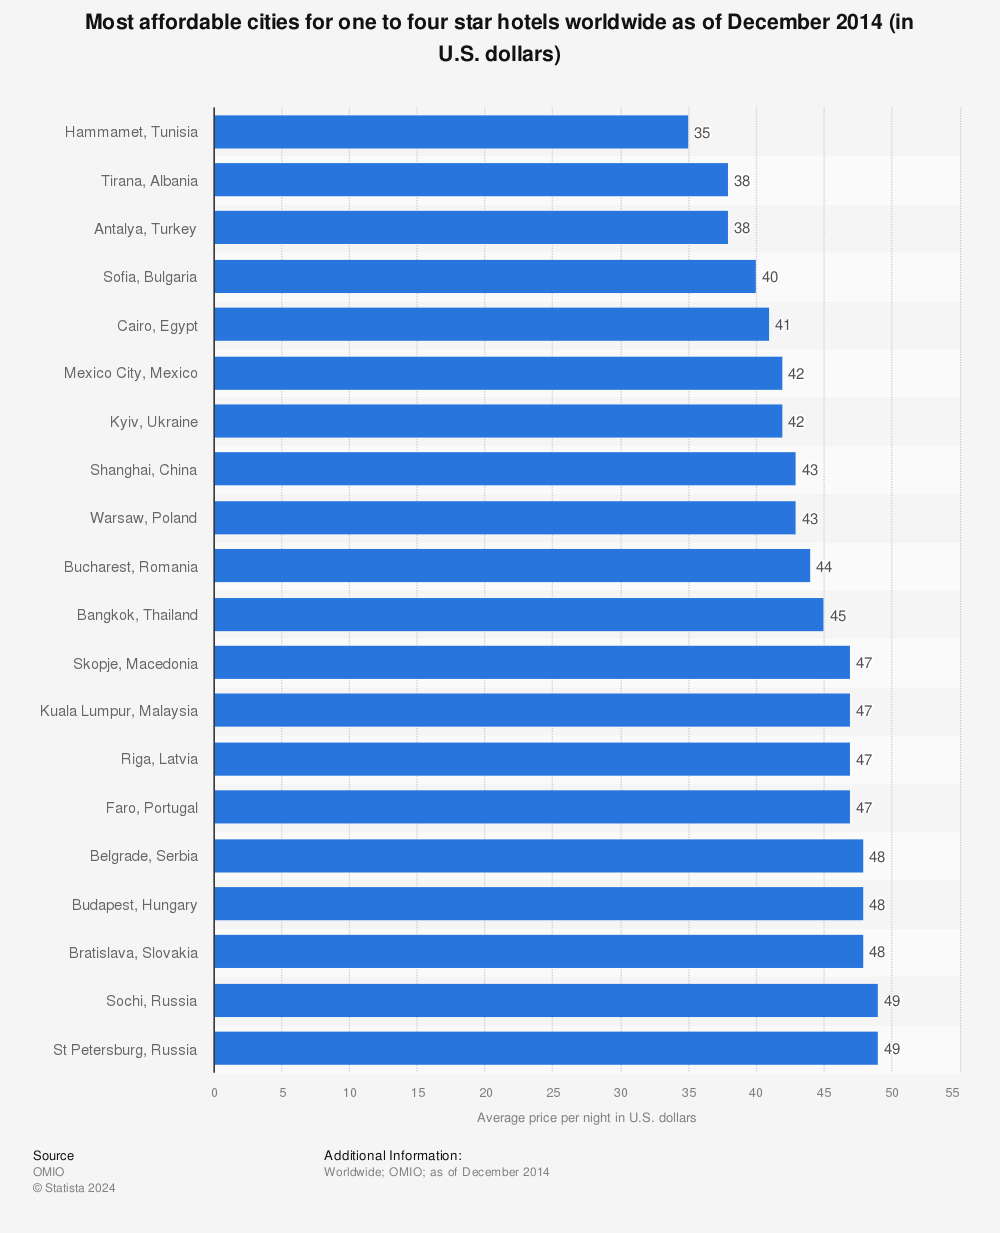 Statistic: Most affordable cities for one to four star hotels worldwide as of December 2014 (in U.S. dollars) | Statista